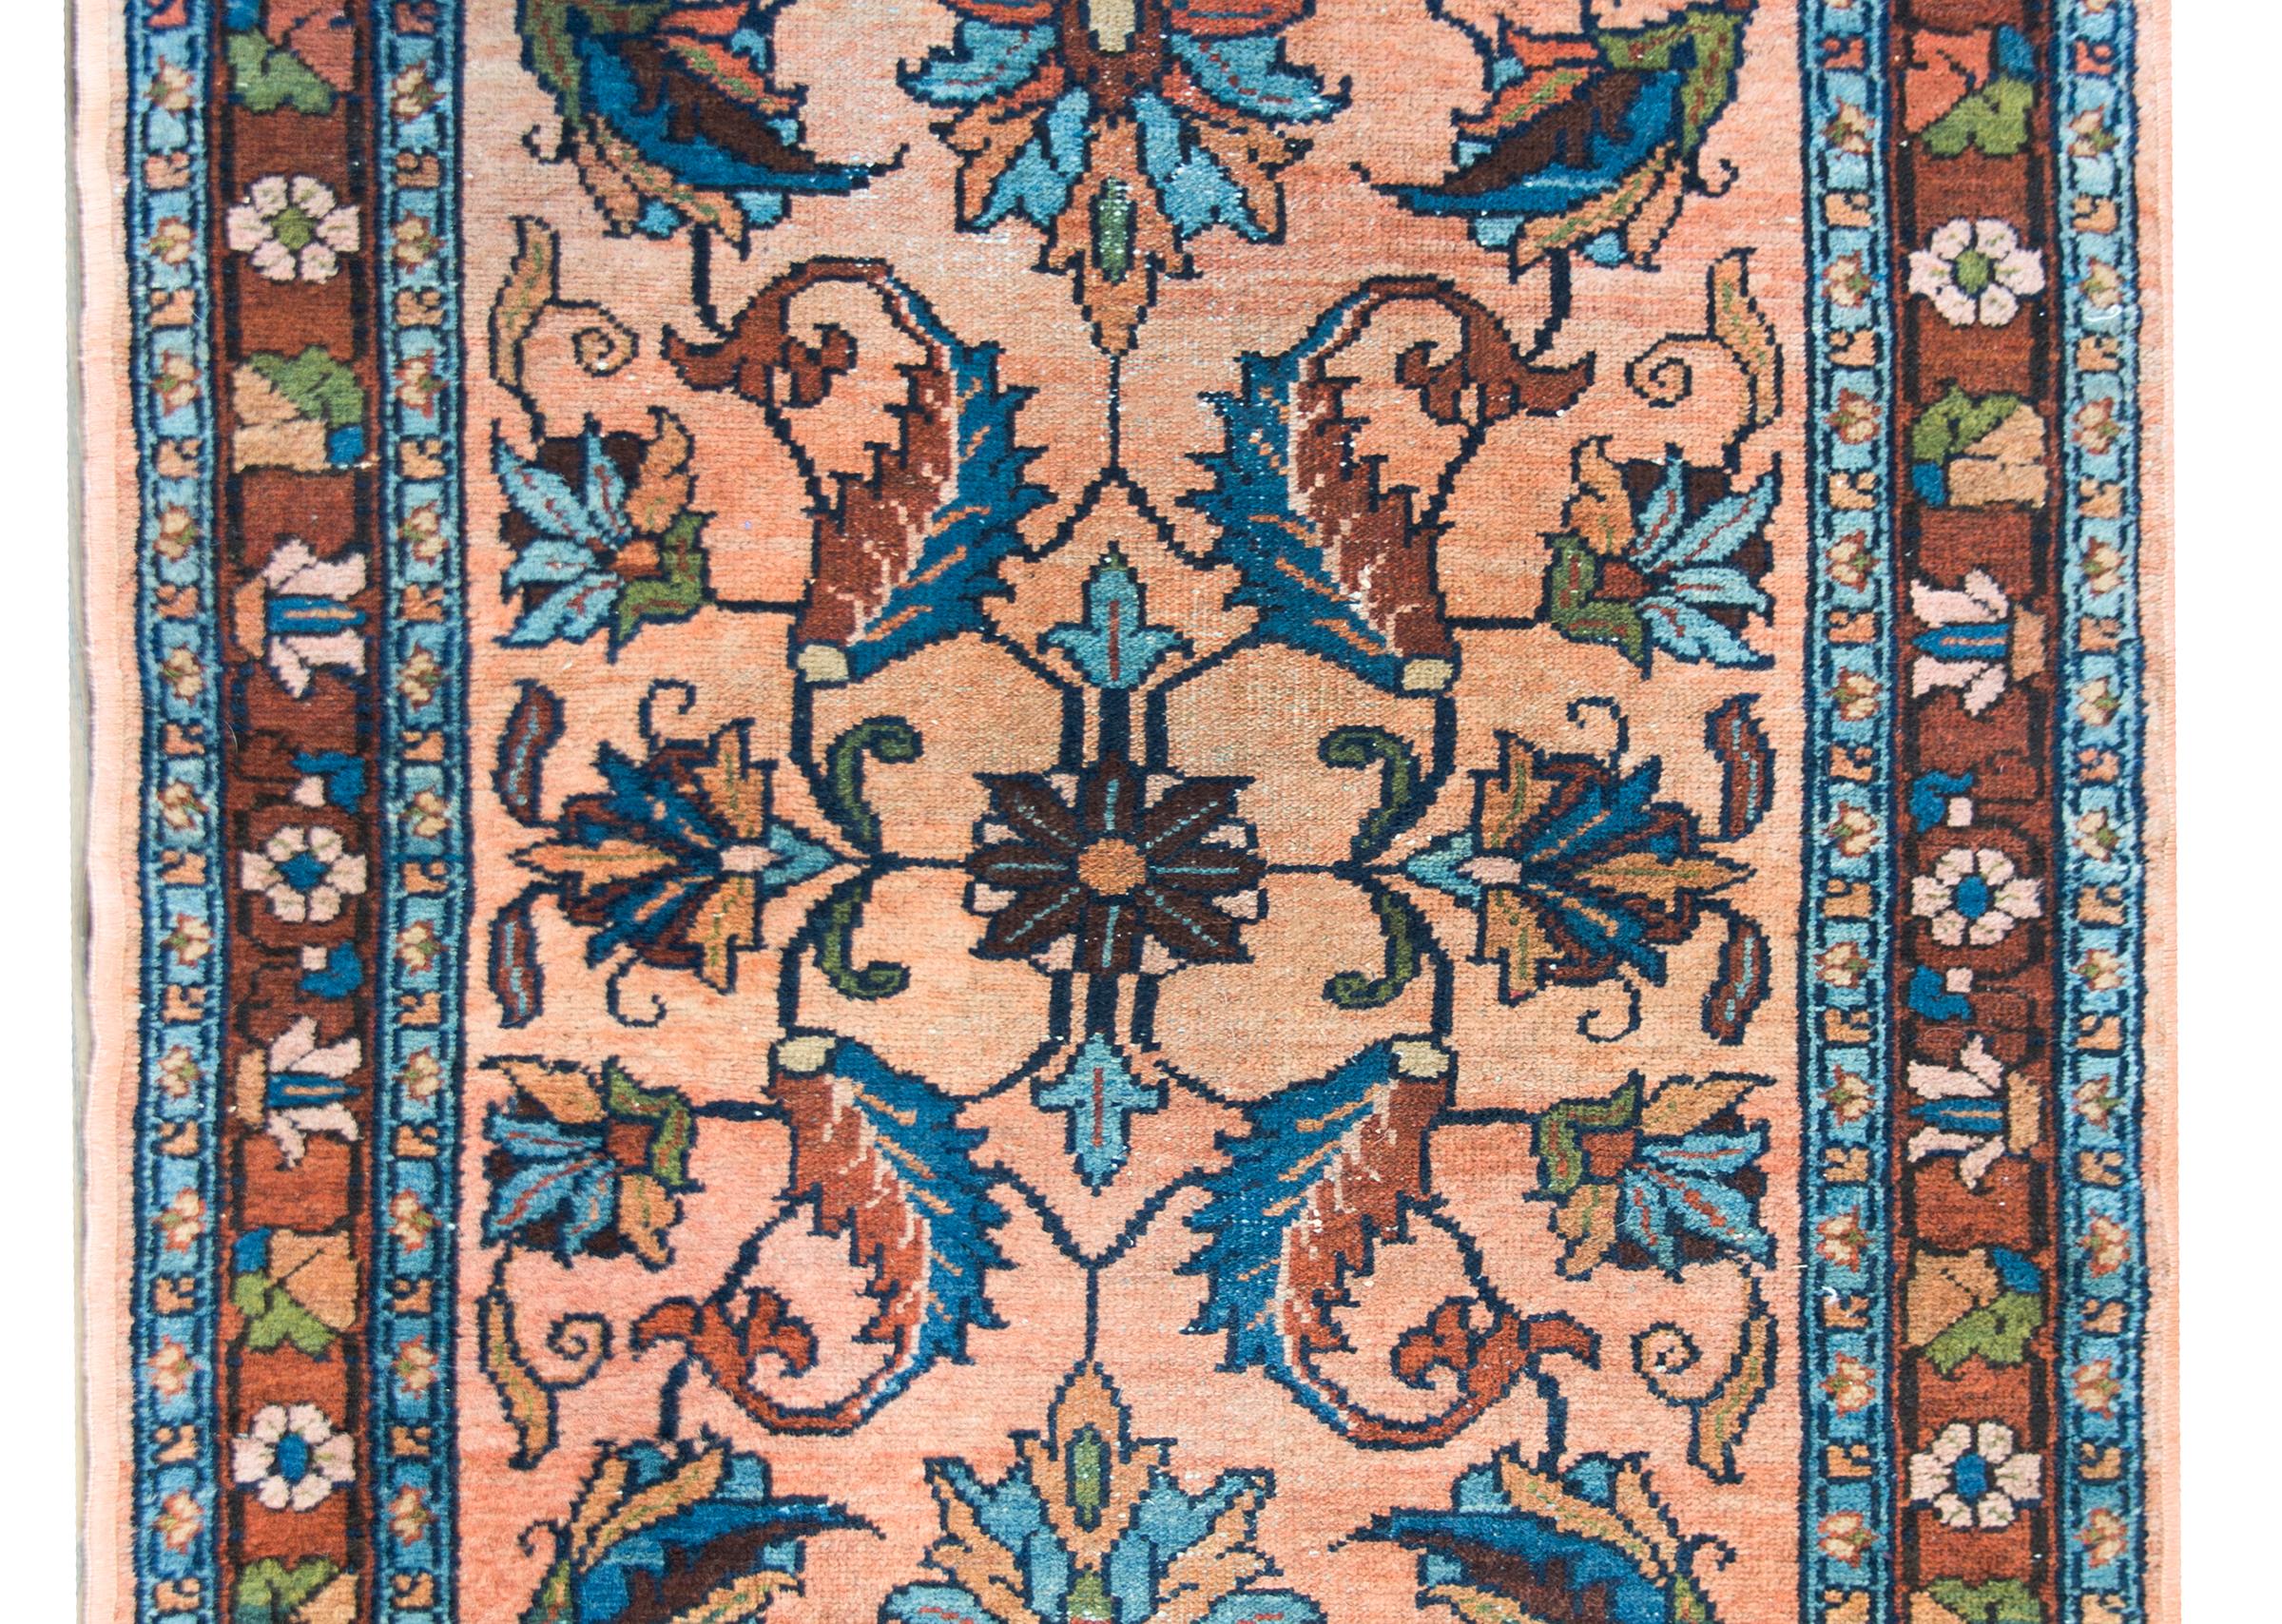 A sweet early 20th century Persian Lilihan rug with a mirrored floral and leaf pattern woven in dark indigo, brick red, brown, and olive green, and set against a salmon colored background. The border is simple with a stylized floral and leaf